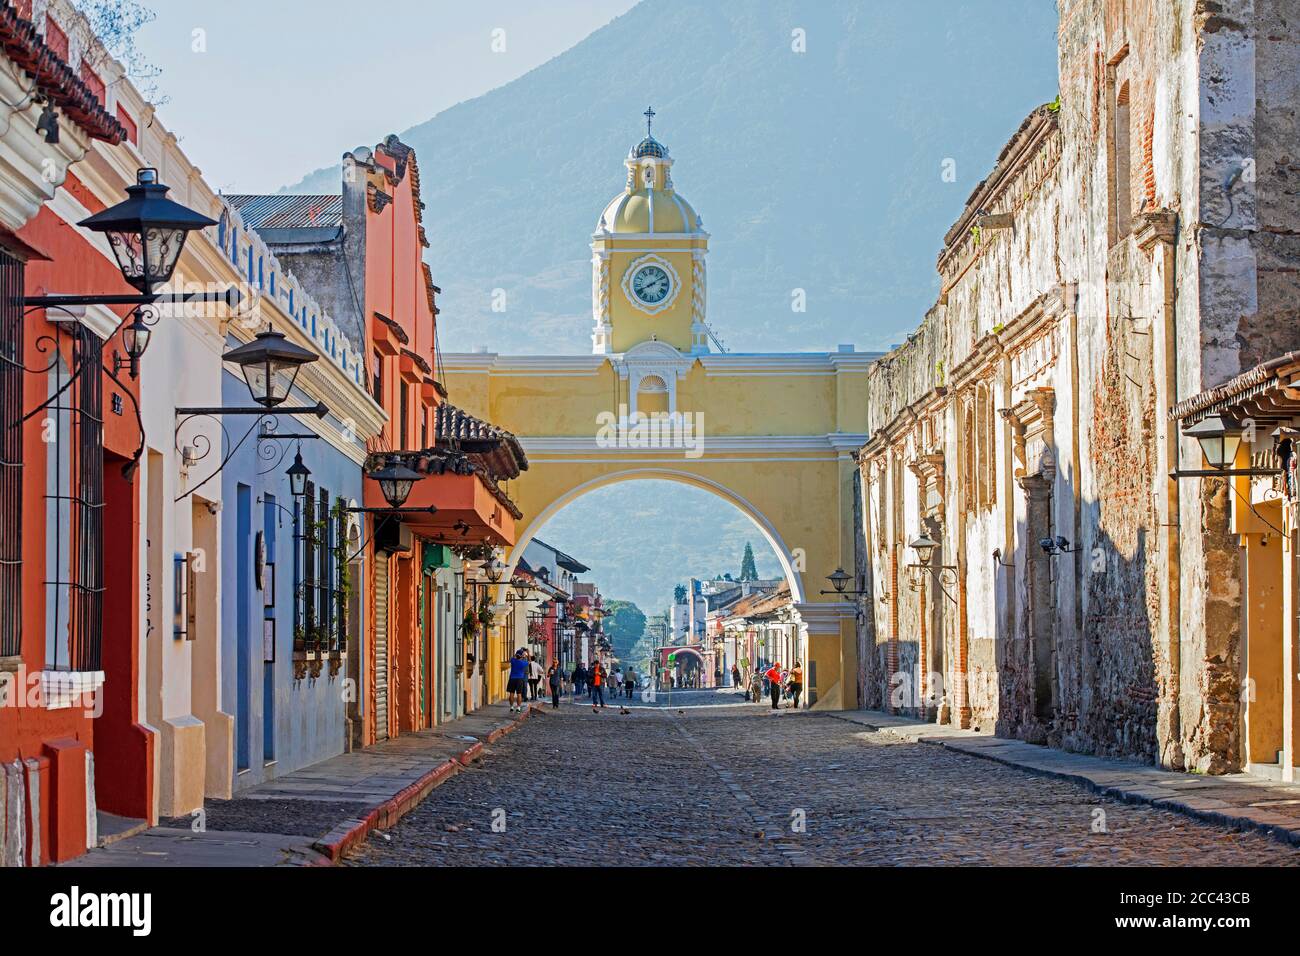 Colourful colonial houses and the 17th century Arco de Santa Catalina Arch in the city Antigua Guatemala, Sacatepéquez Department, Guatemala Stock Photo